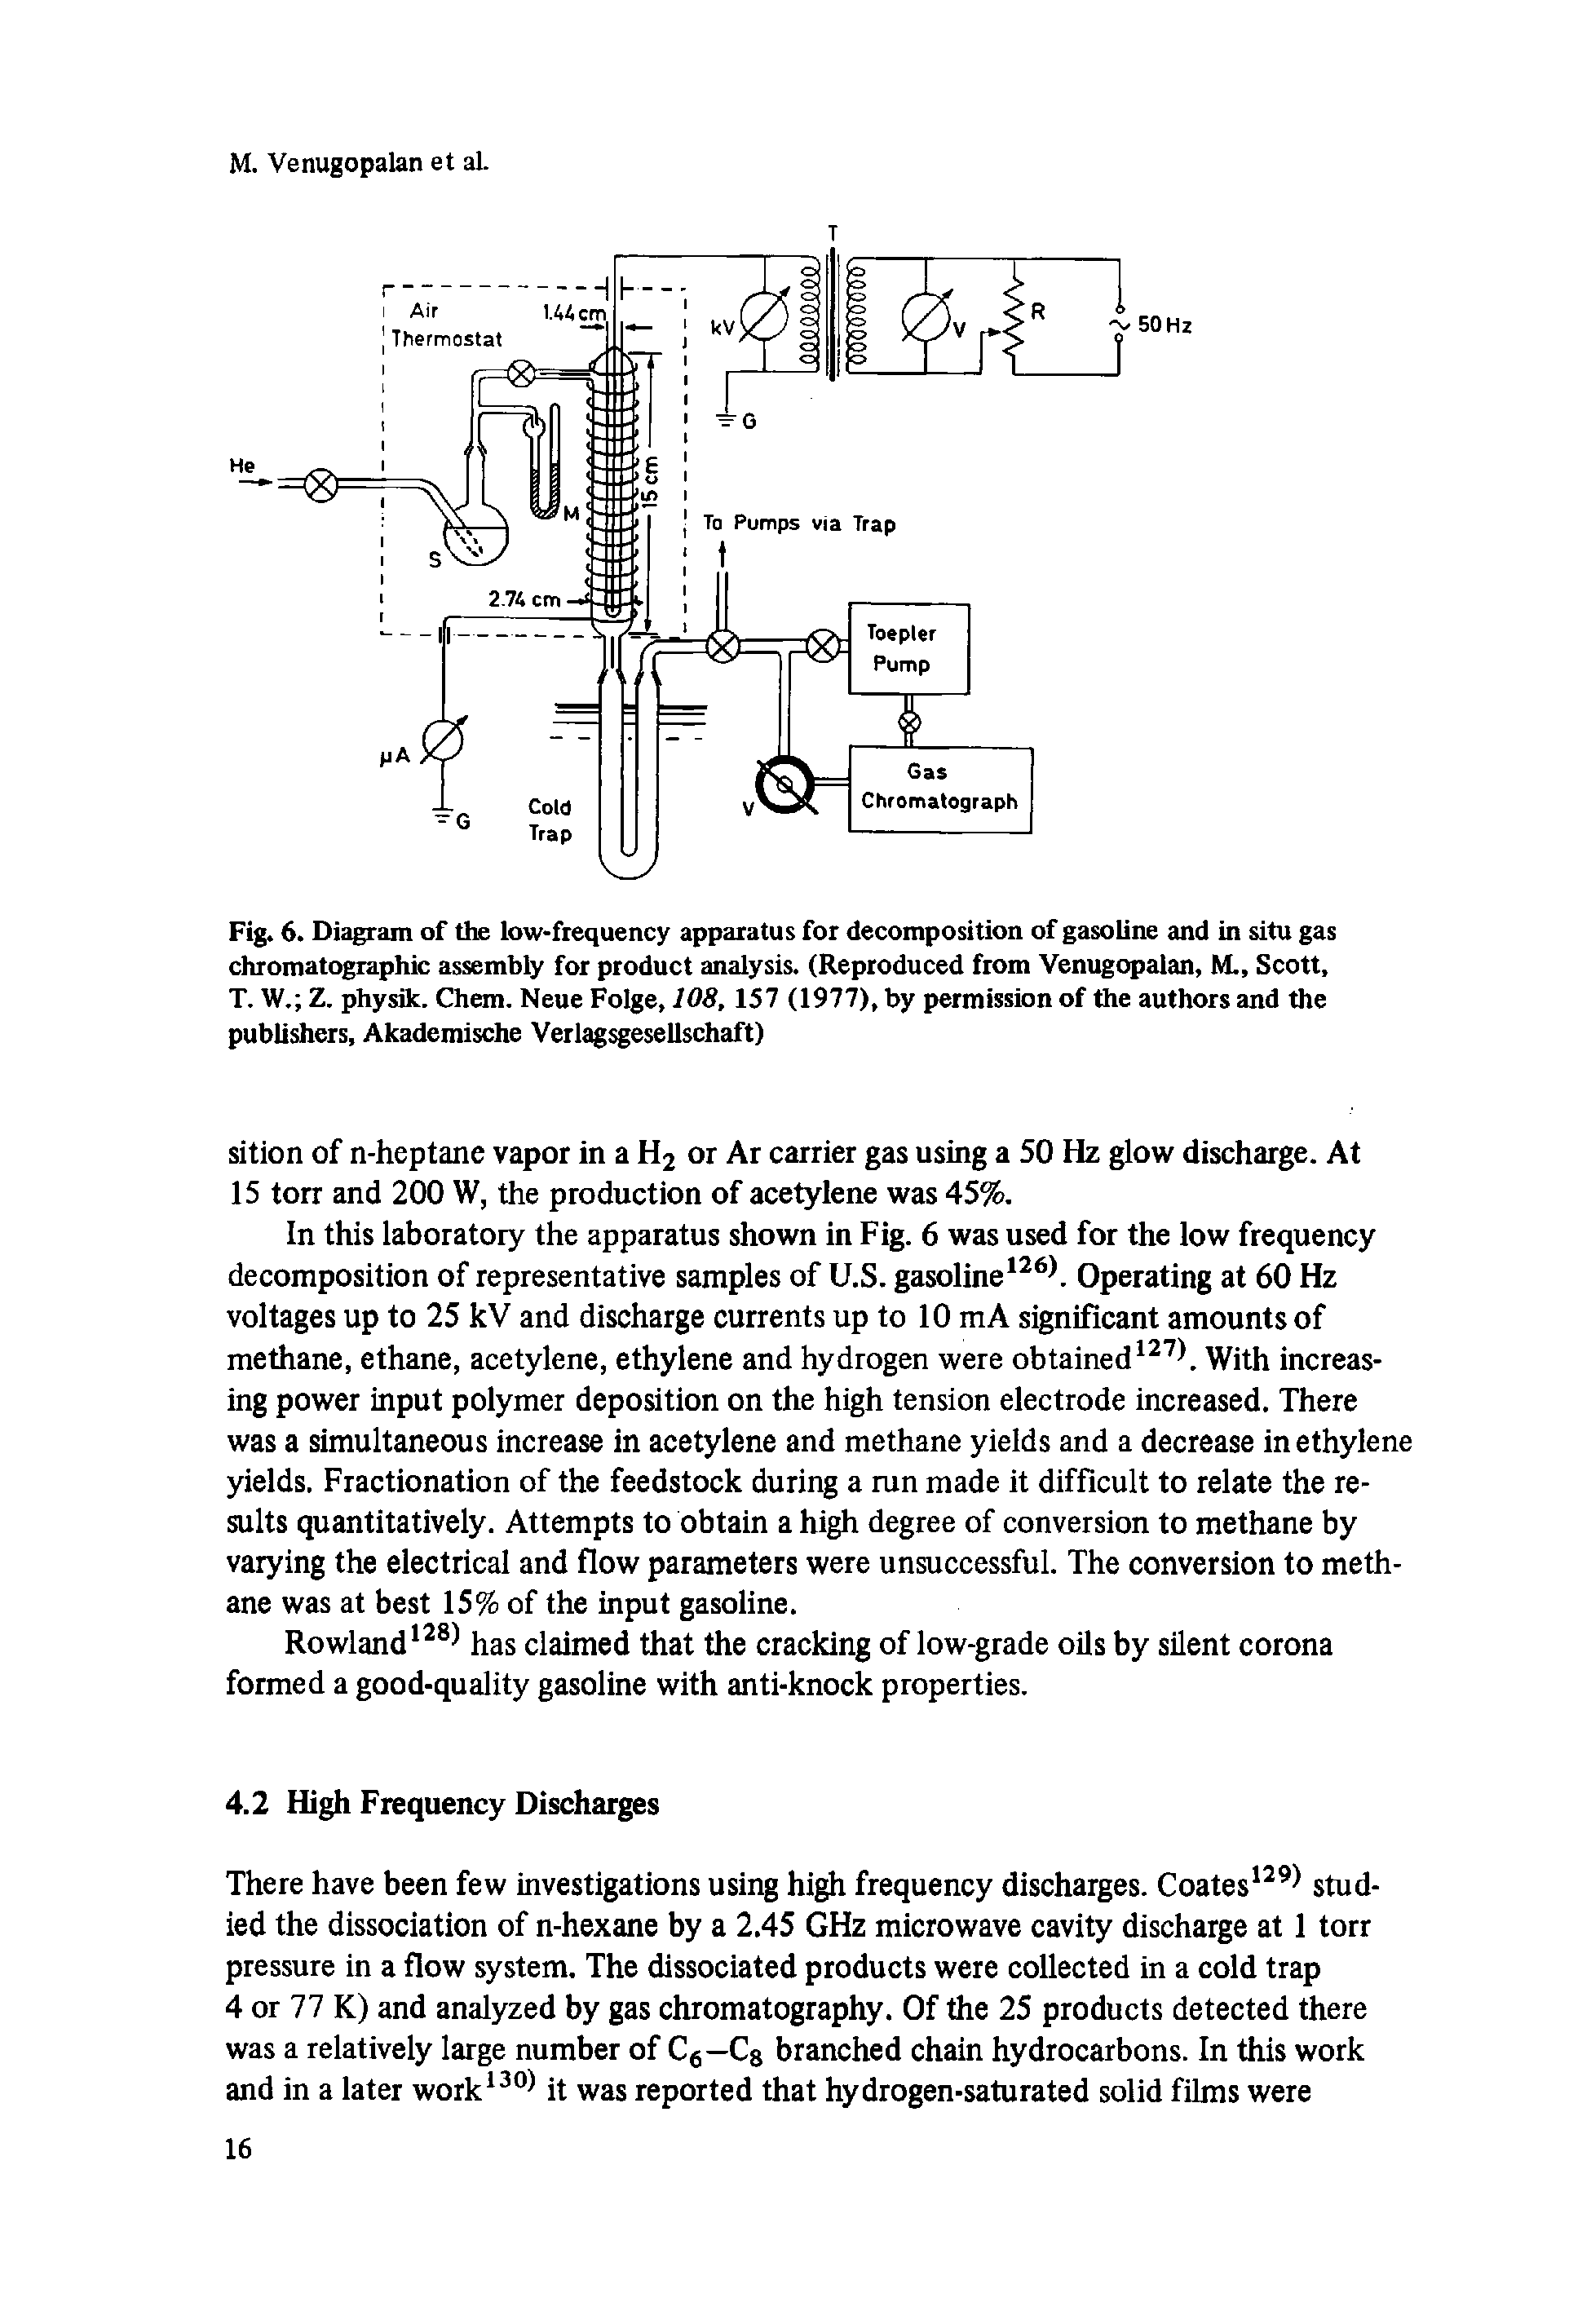 Fig. 6. Diagram of the low-frequency apparatus for decomposition of gasoline and in situ gas chromatographic assembly for product analysis. (Reproduced from Venugopalan, M., Scott, T. W. Z. physik. Chem. Neue Folge, 108,157 (1977), by permission of the authors and the publishers, Akademische Verlagsgesellschaft)...